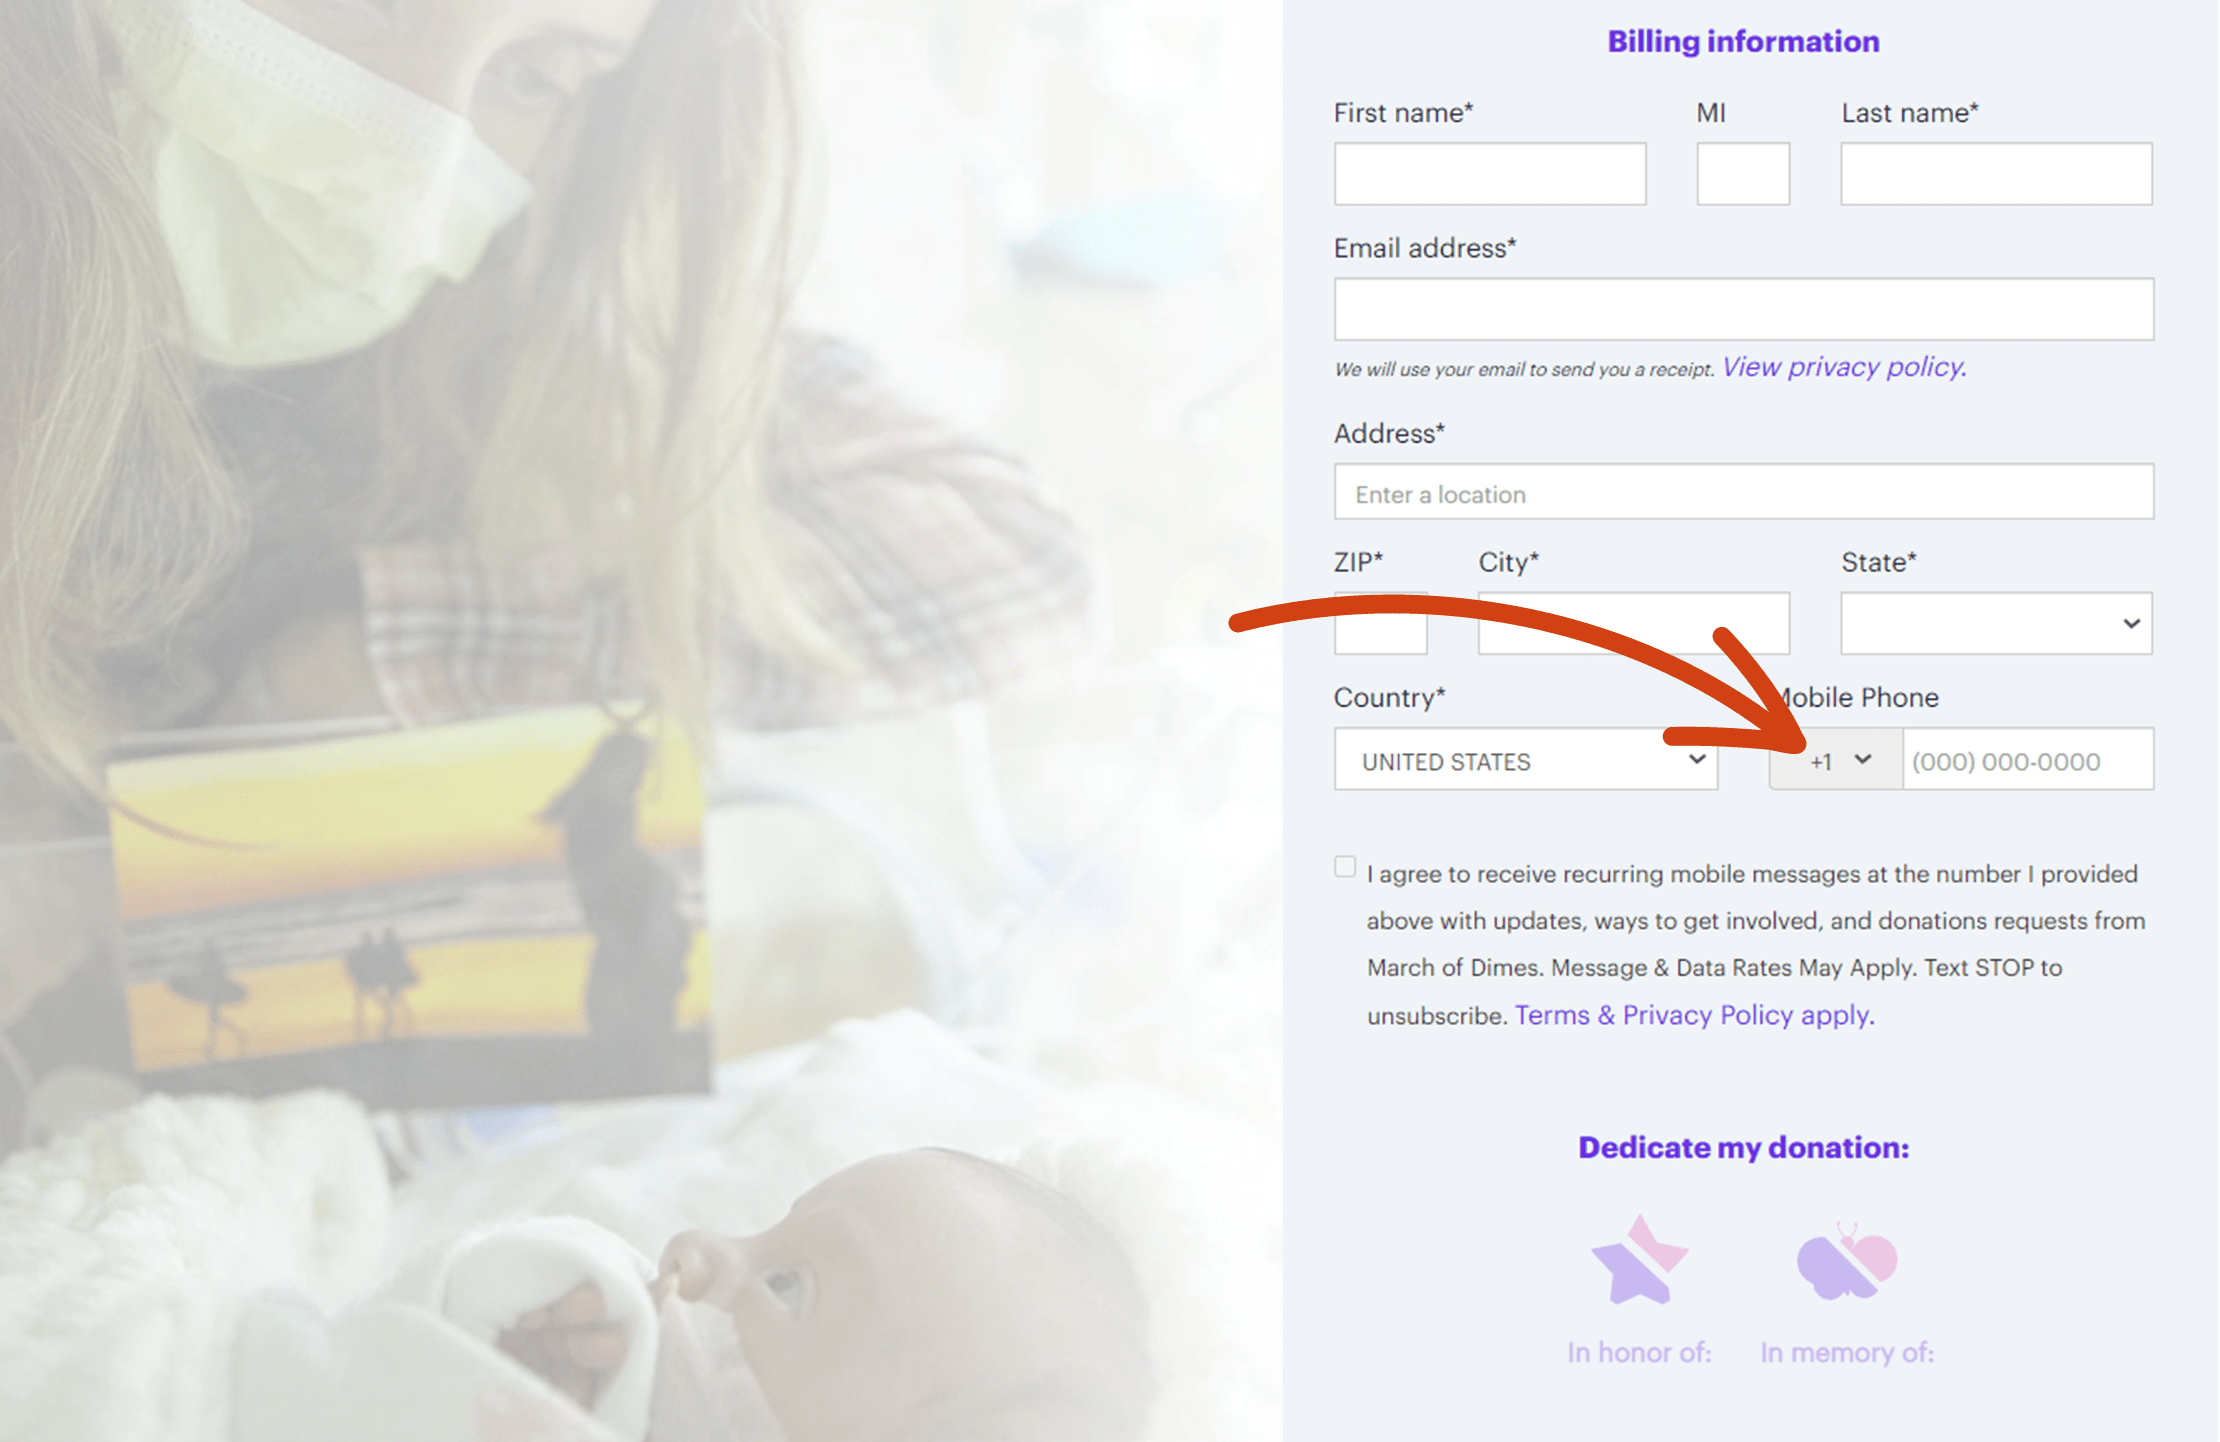 onation form on the March of Dimes website